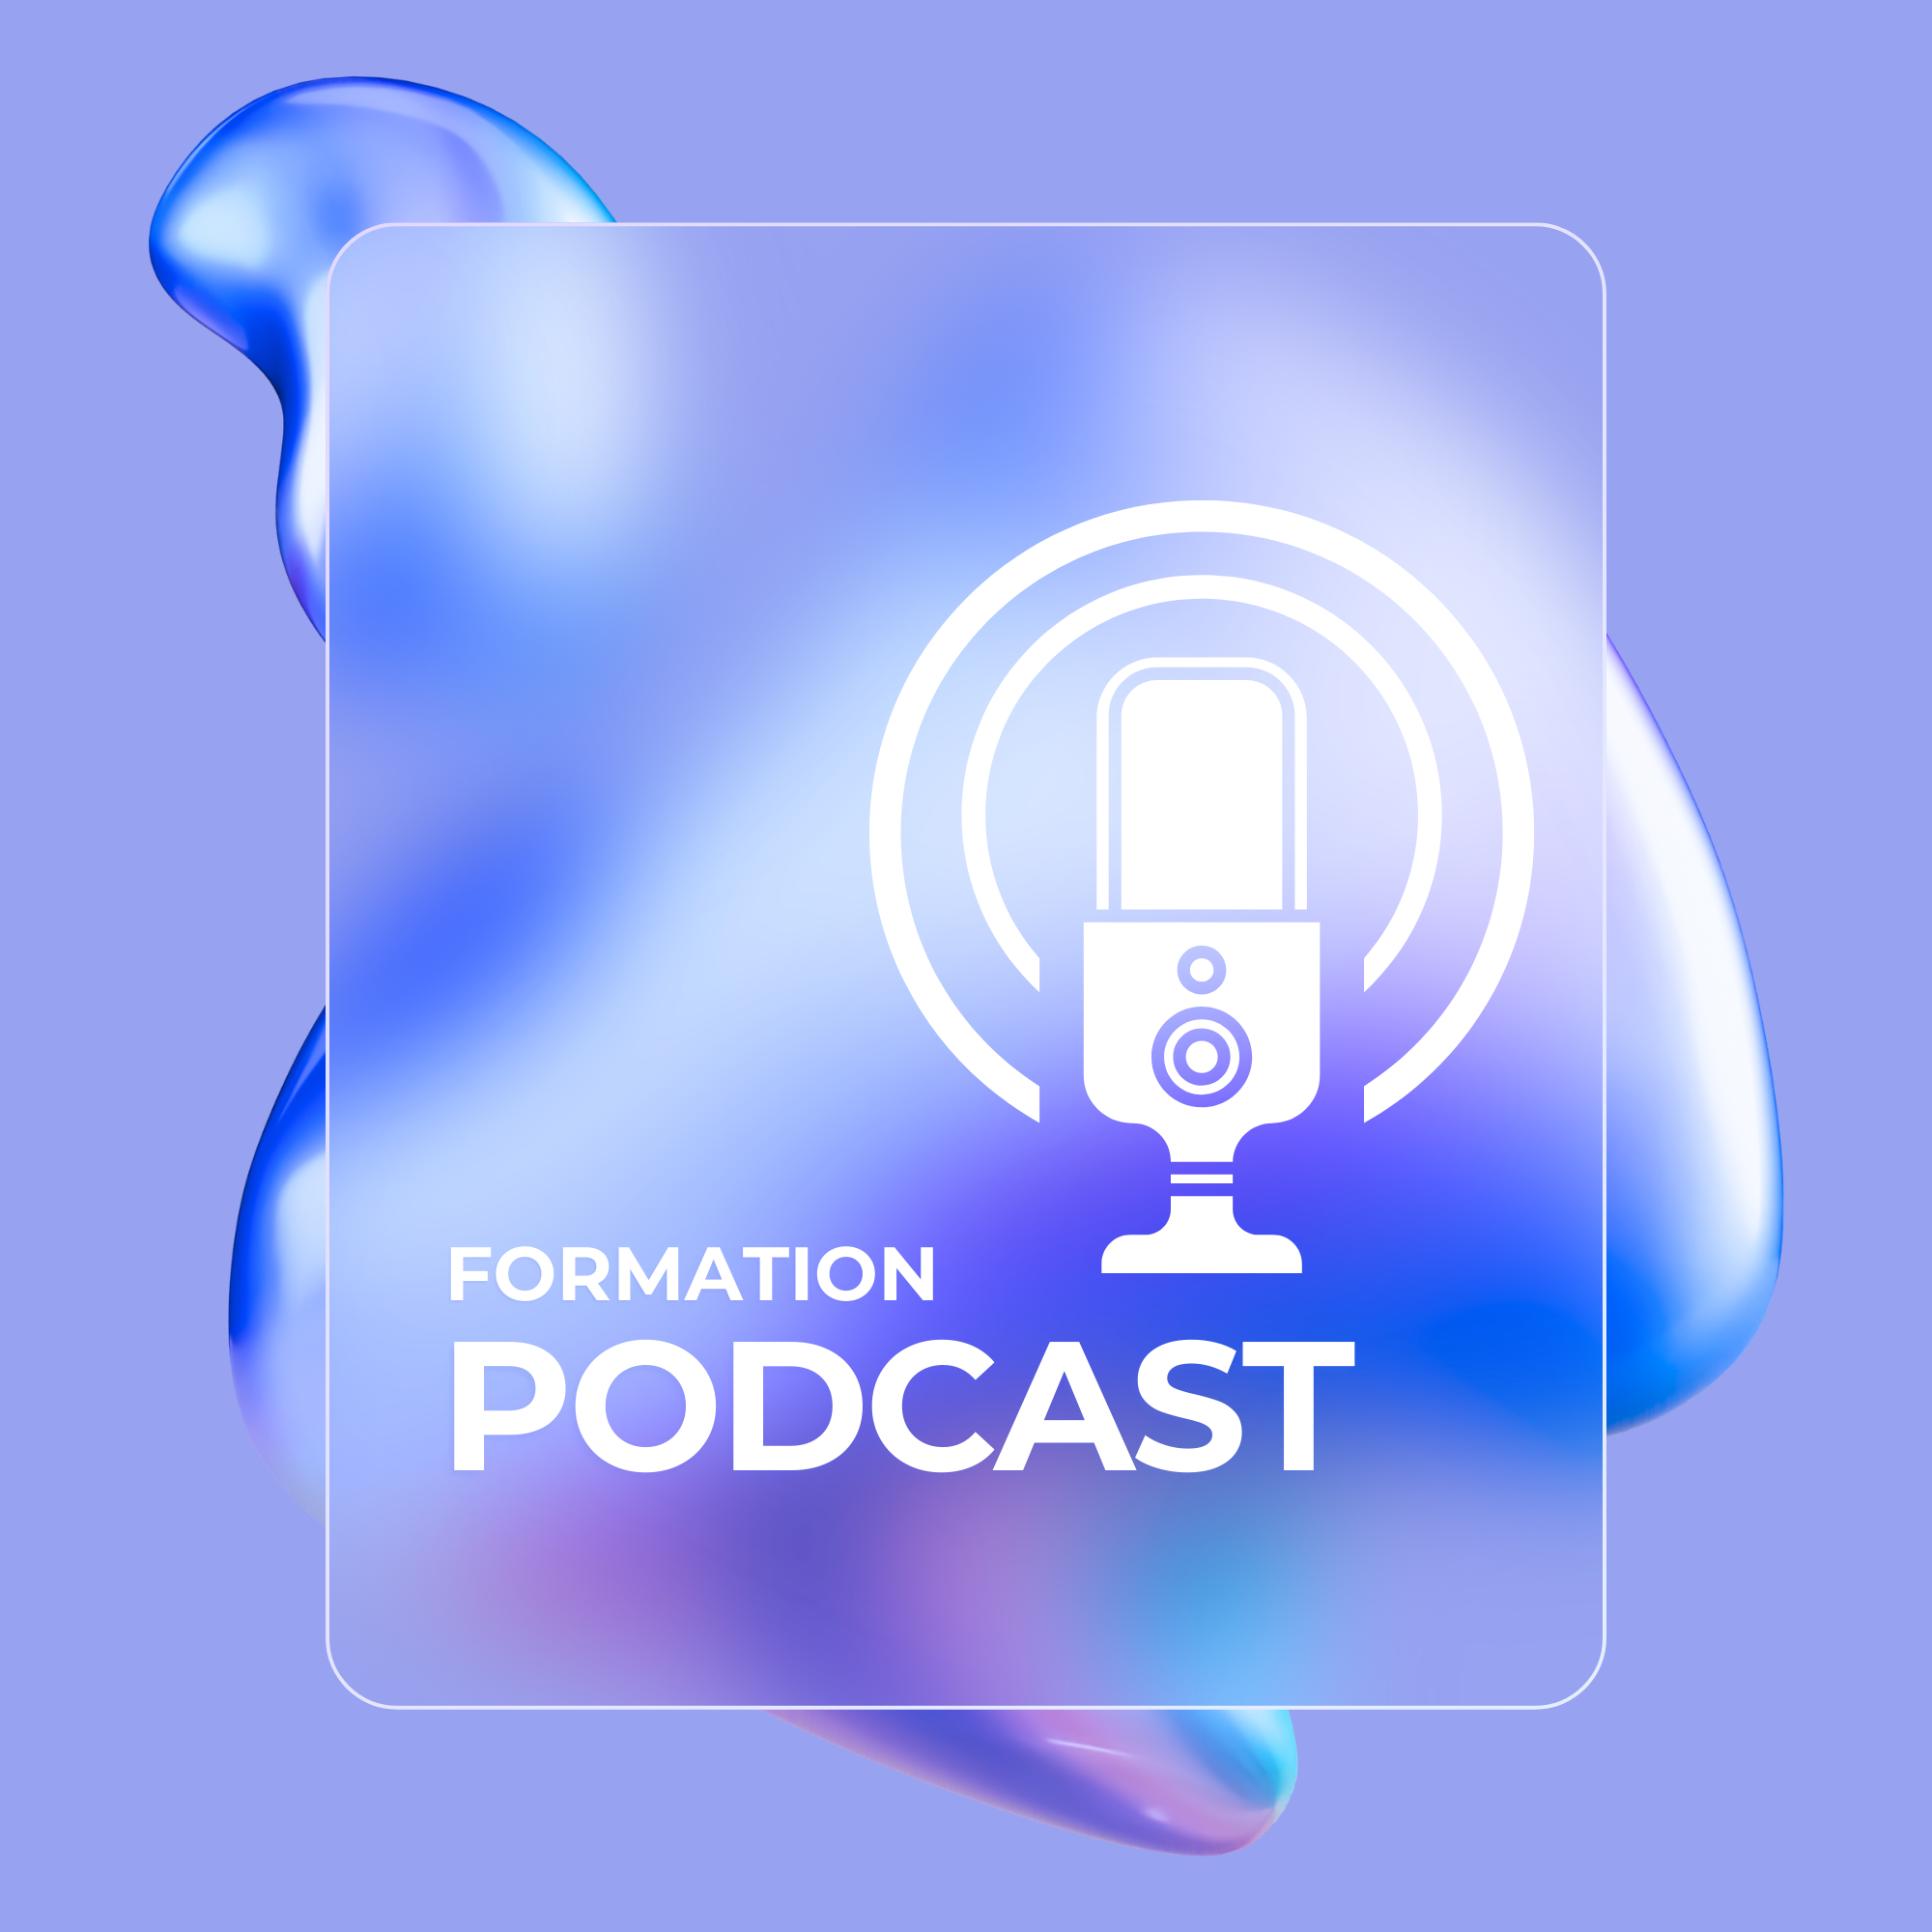 Formation podcast